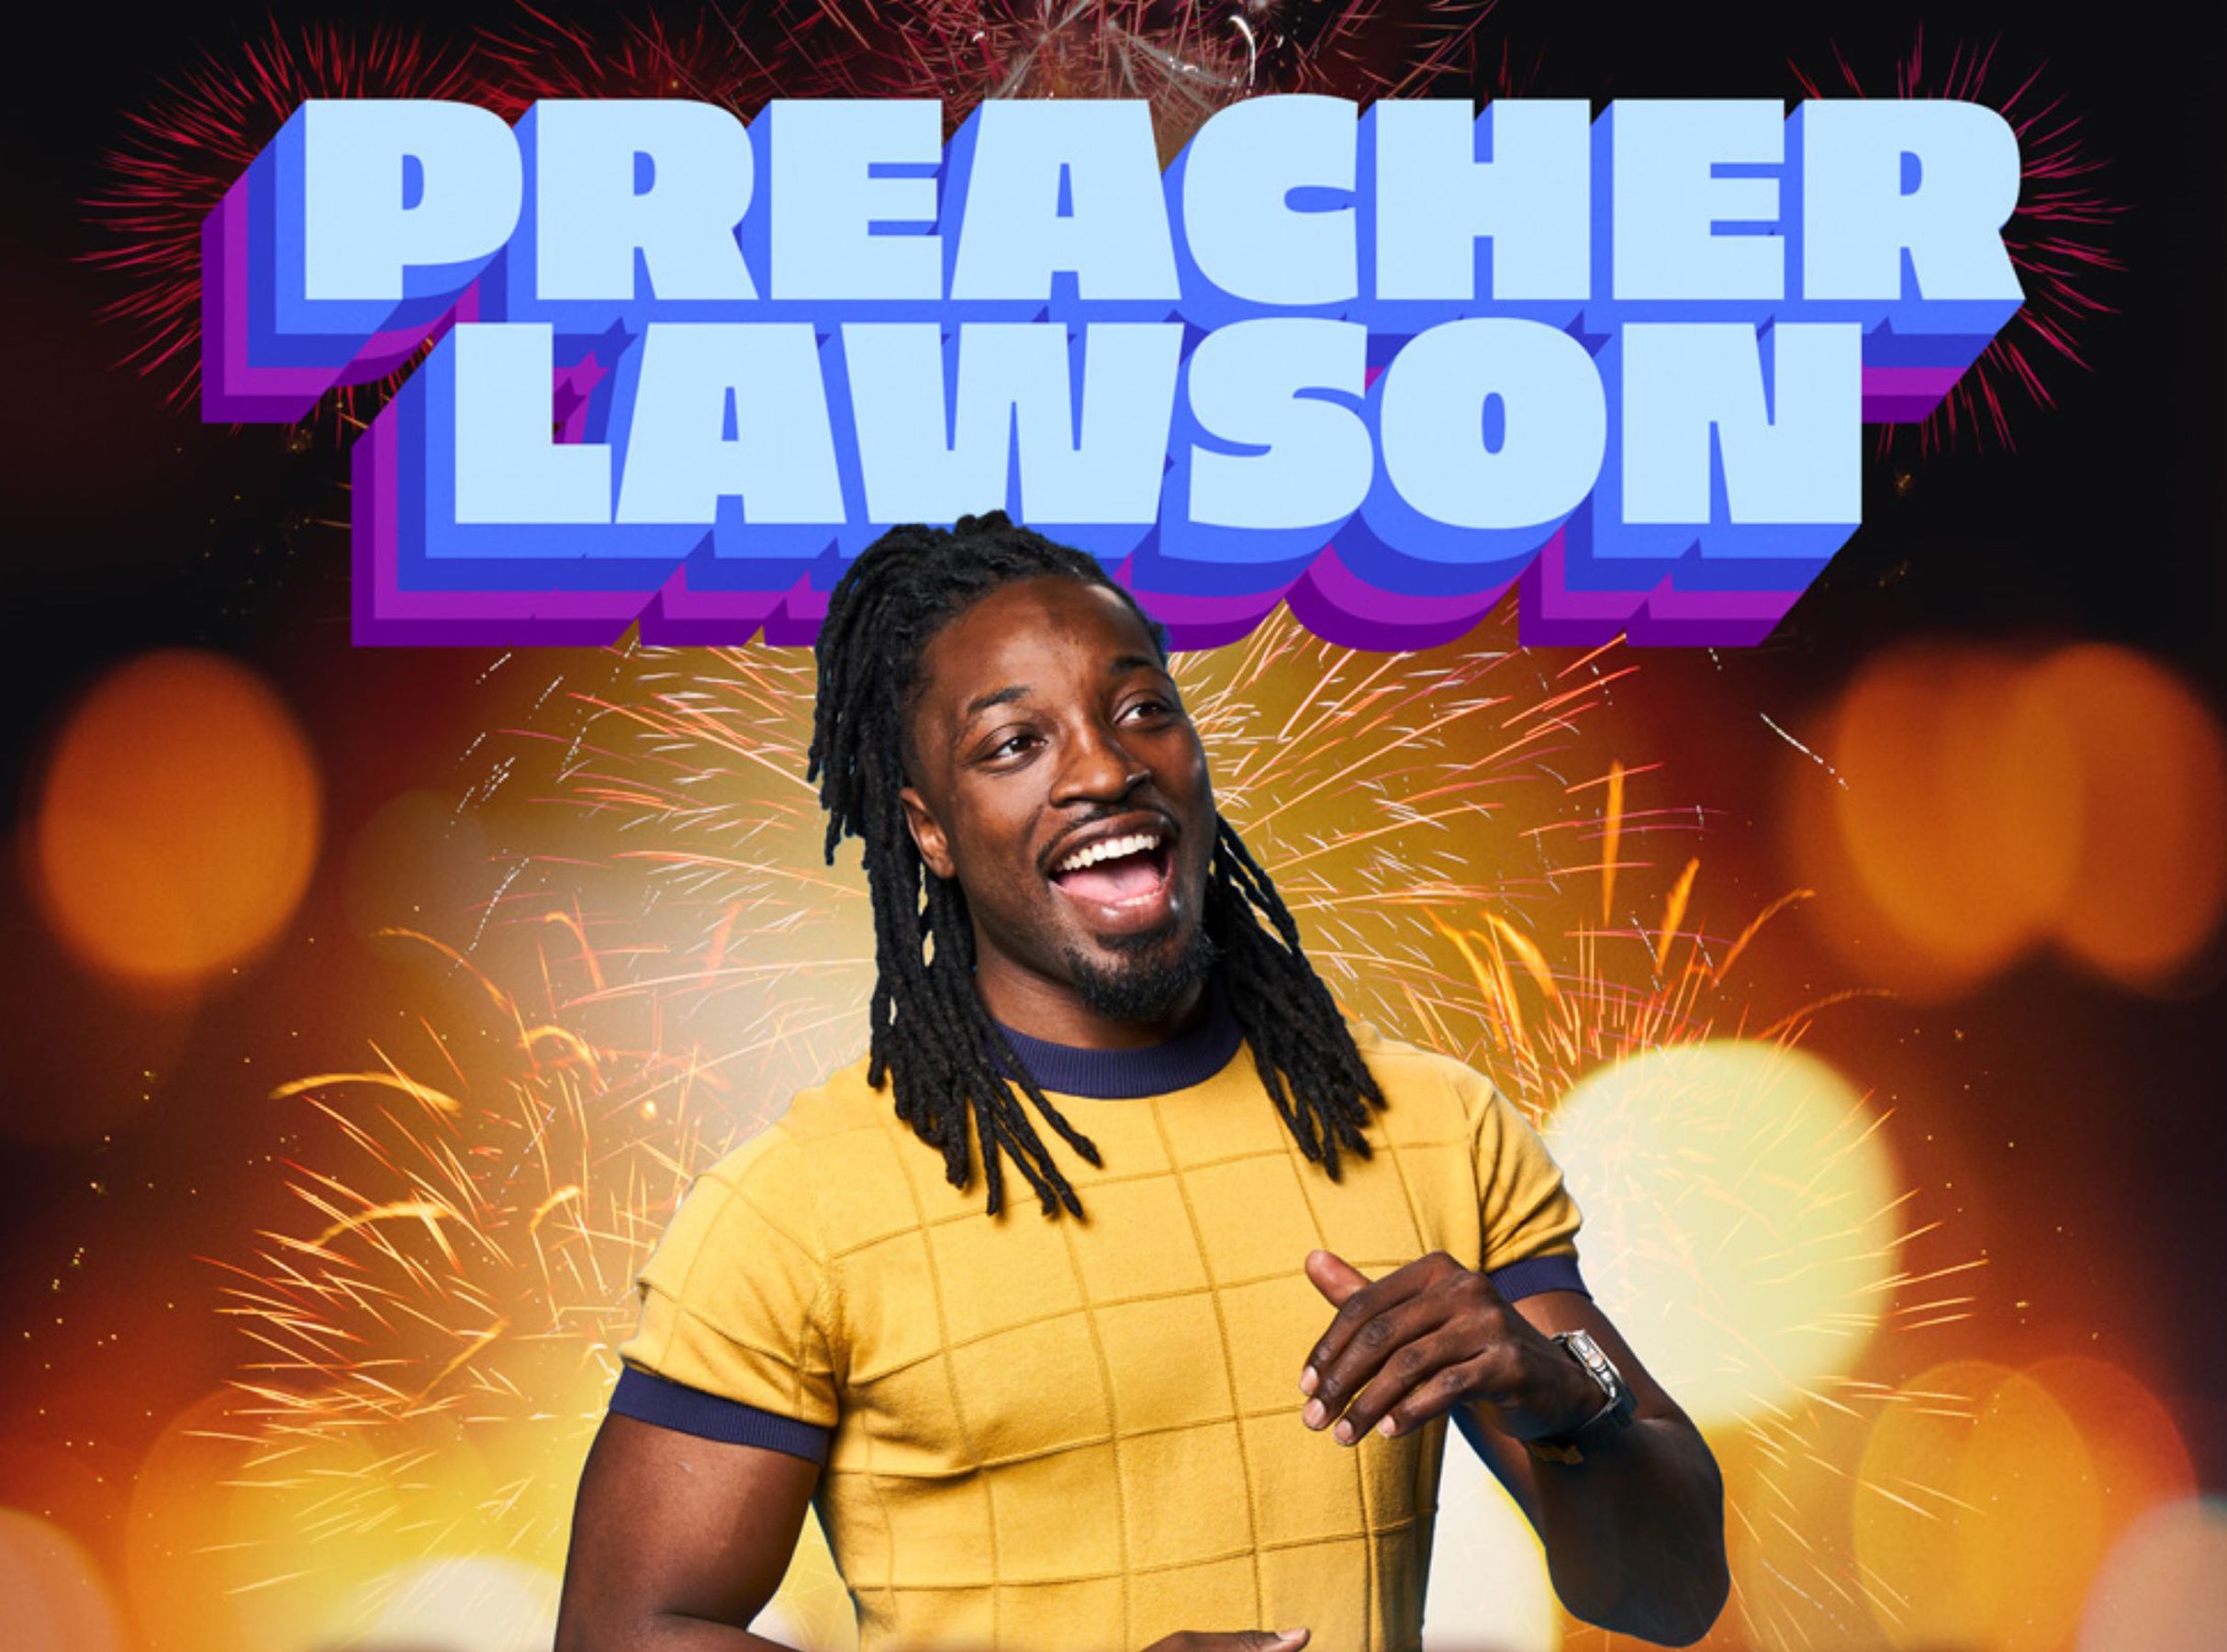 Preacher Lawson: Best Day Ever! at The Wilbur